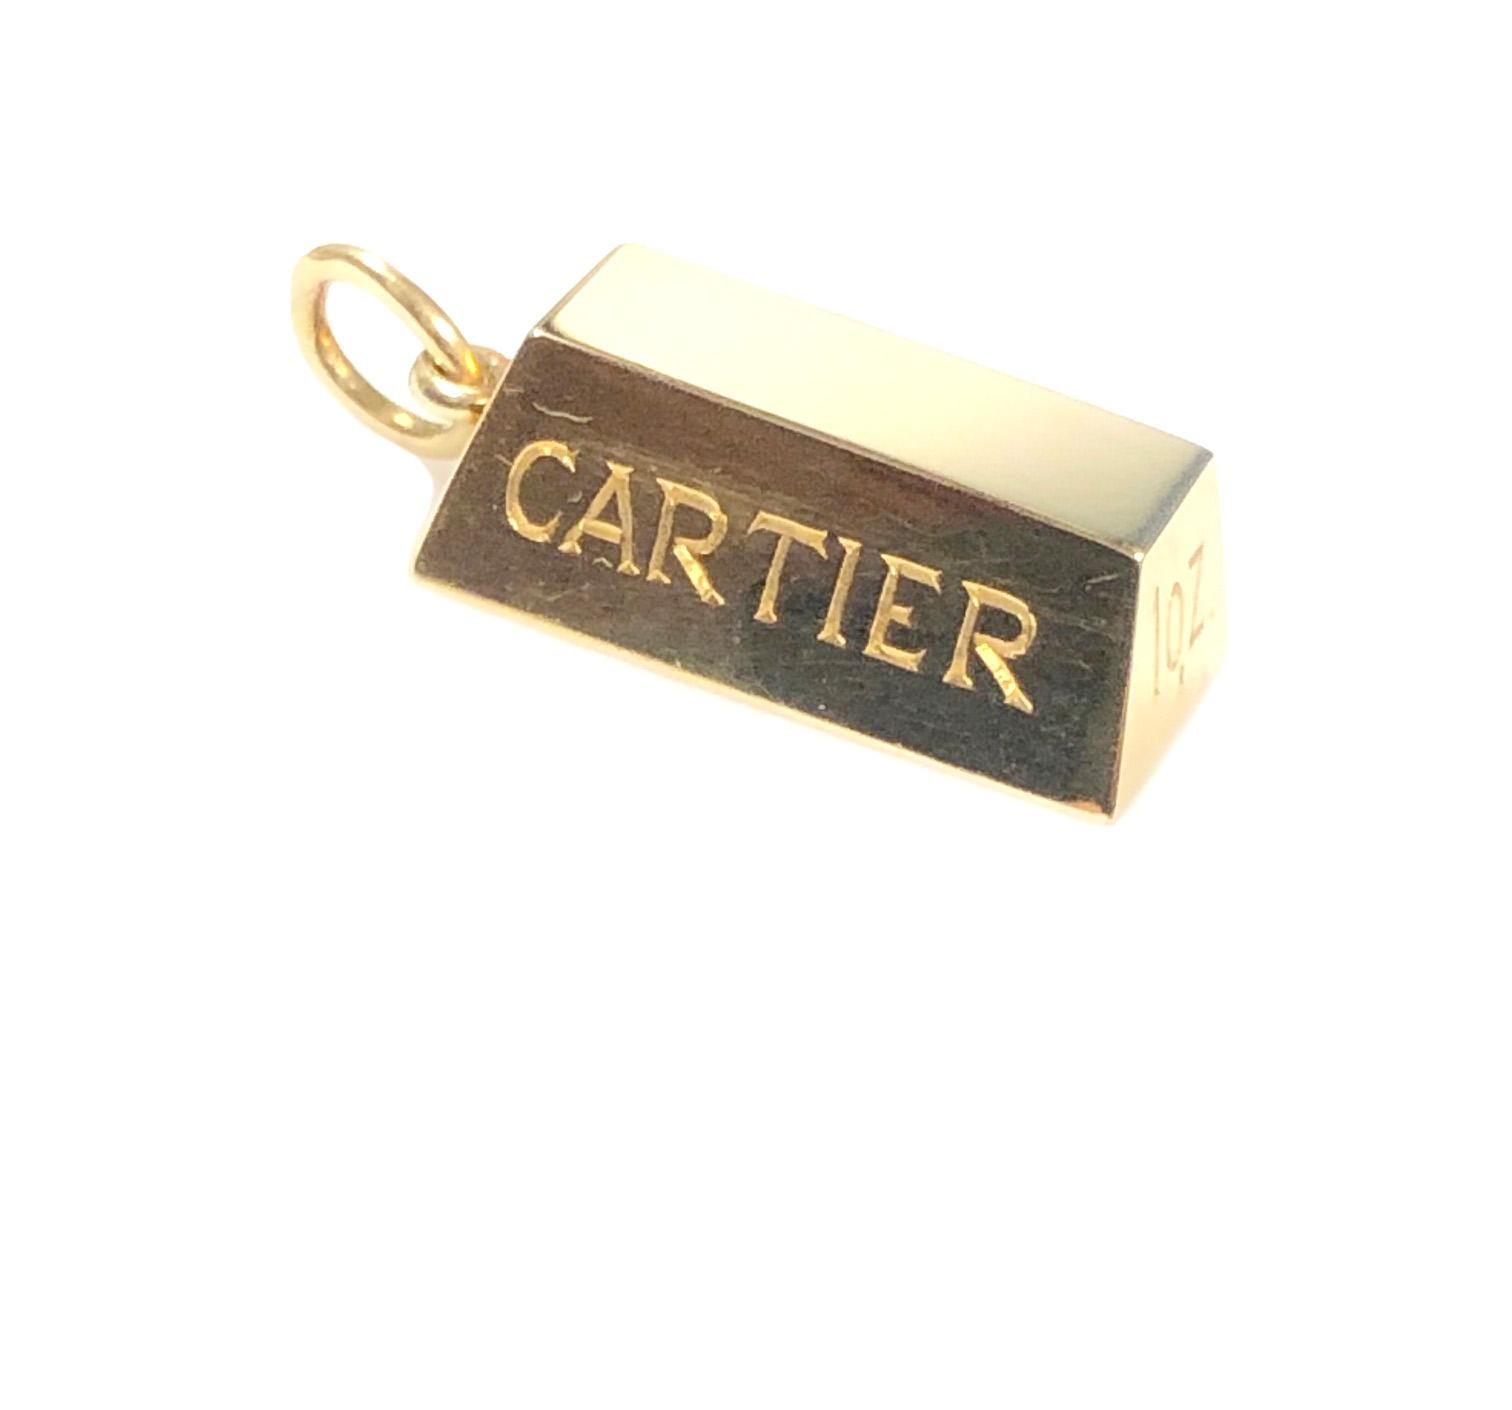 Circa 1970s Cartier 18k Yellow Gold 1 ounce Ingot Pendant. Measuring 1 inch in length, this unique piece is new, never worn and comes in the original Cartier Pouch and box